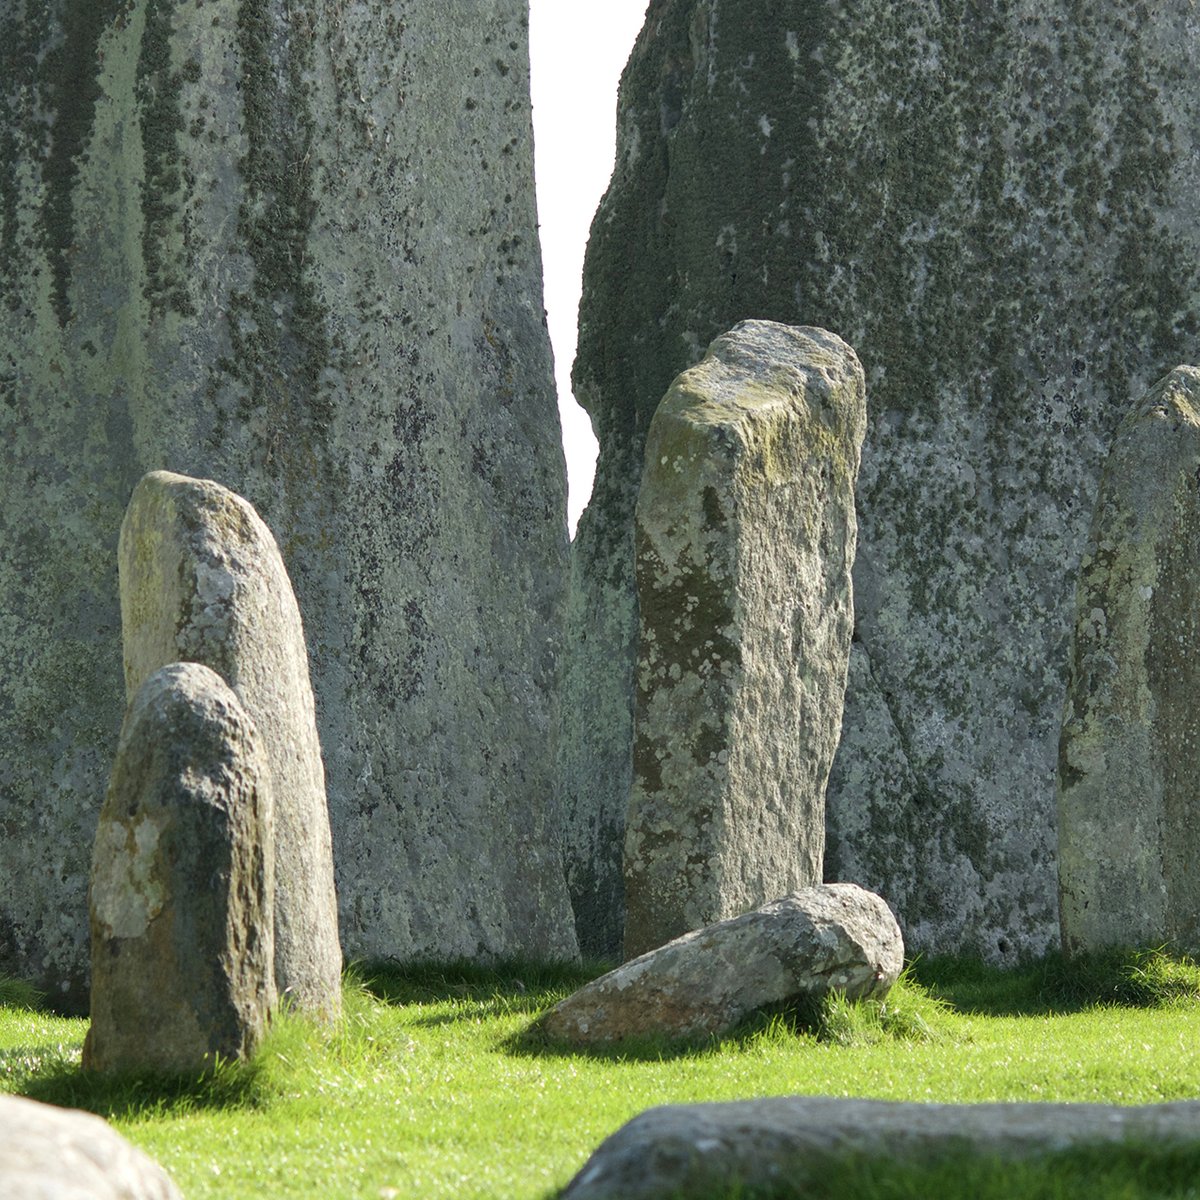 A photograph of Stonehenge, showing stones emerging from green grass.